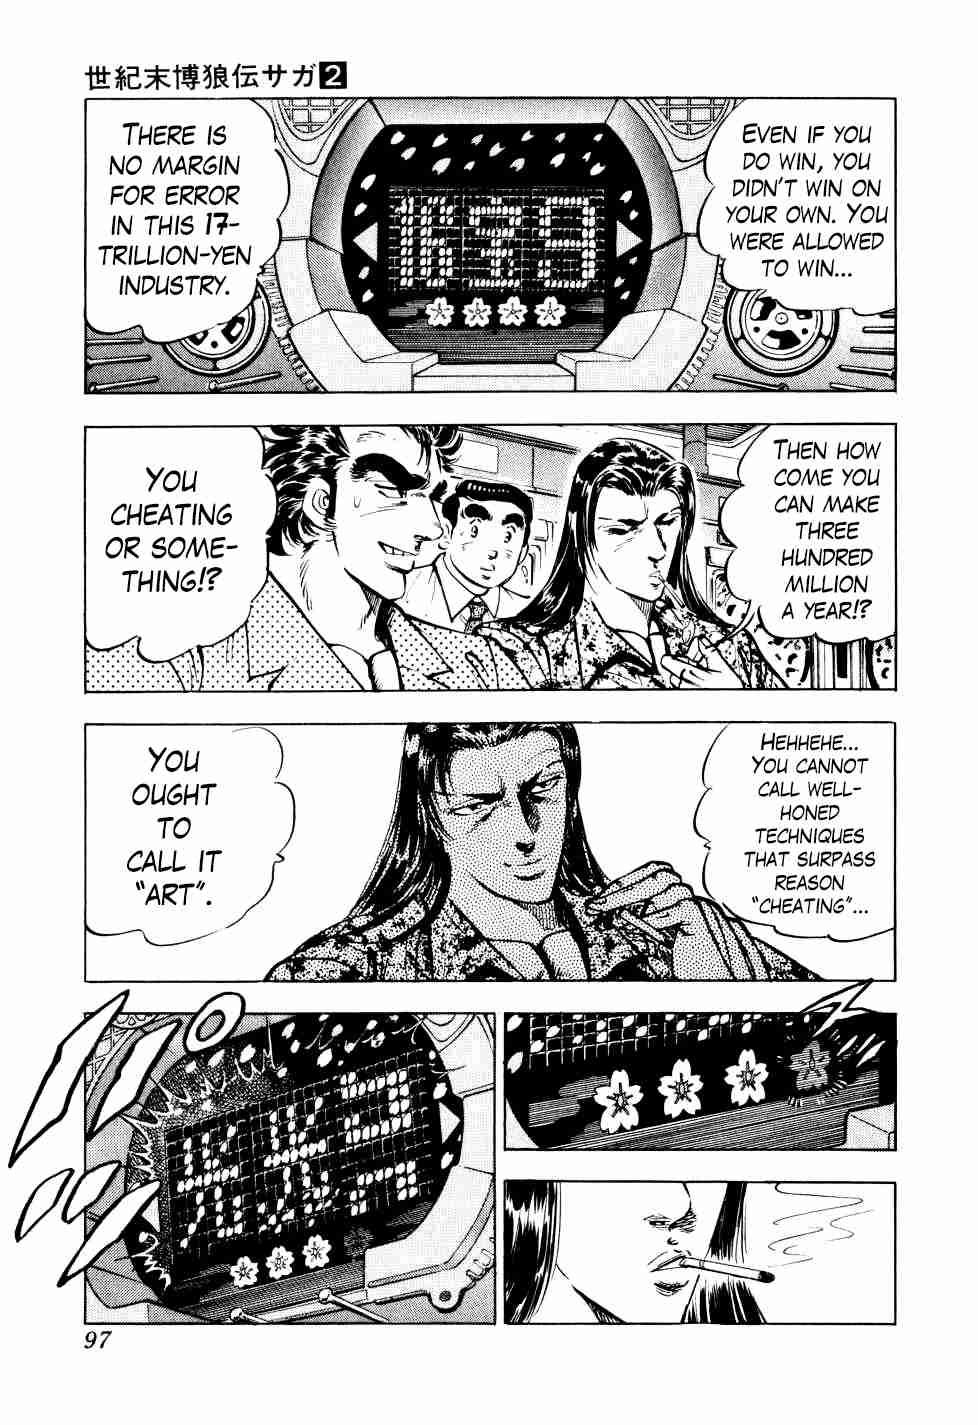 Legend of the End of Century Gambling Wolf Saga Vol. 2 Ch. 11 The Vagrant Genius Pachinko Player, Part 4